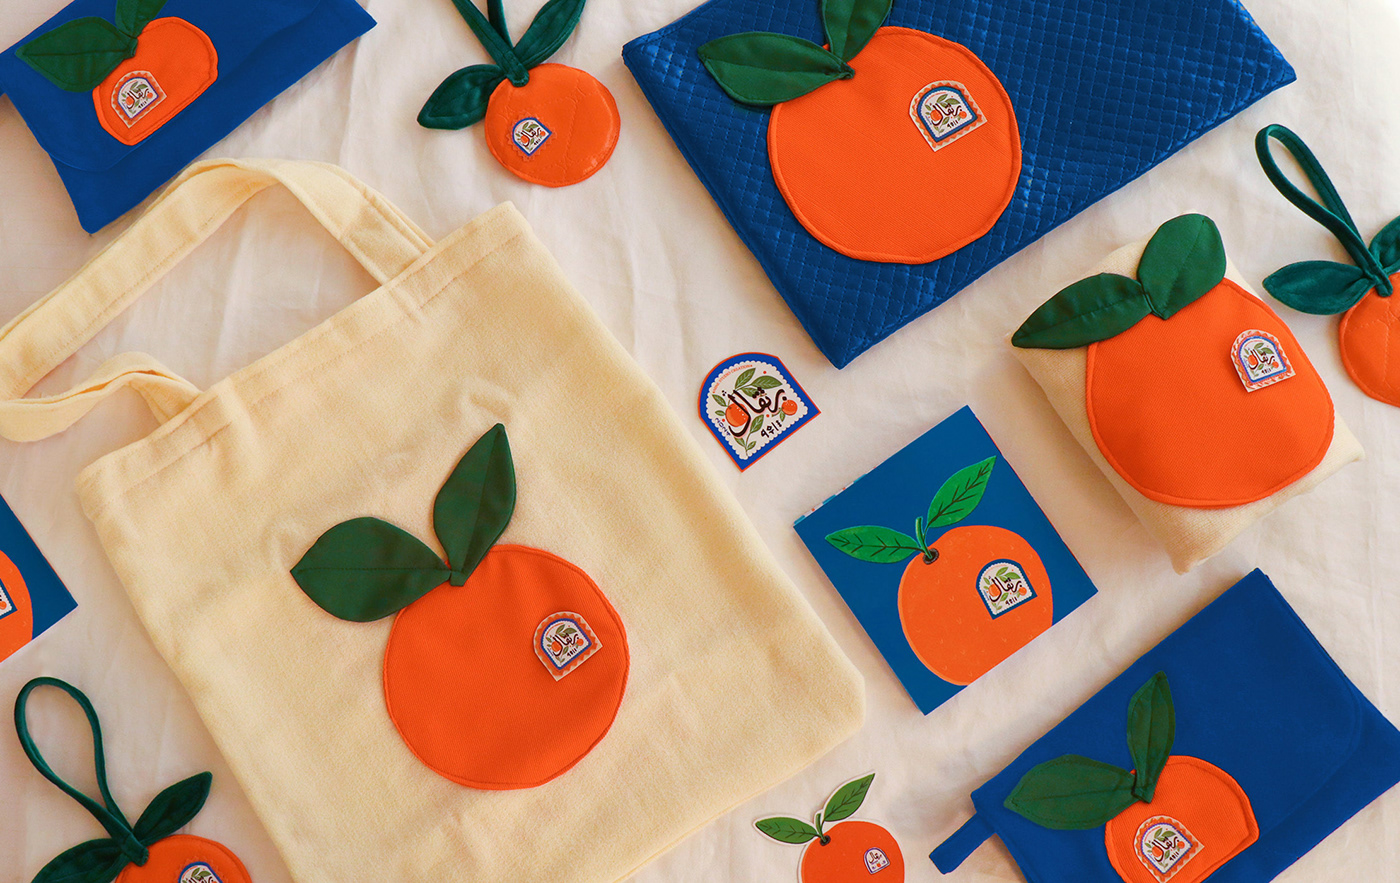  Handmade everyday items celebrating oranges crafted from various materials.